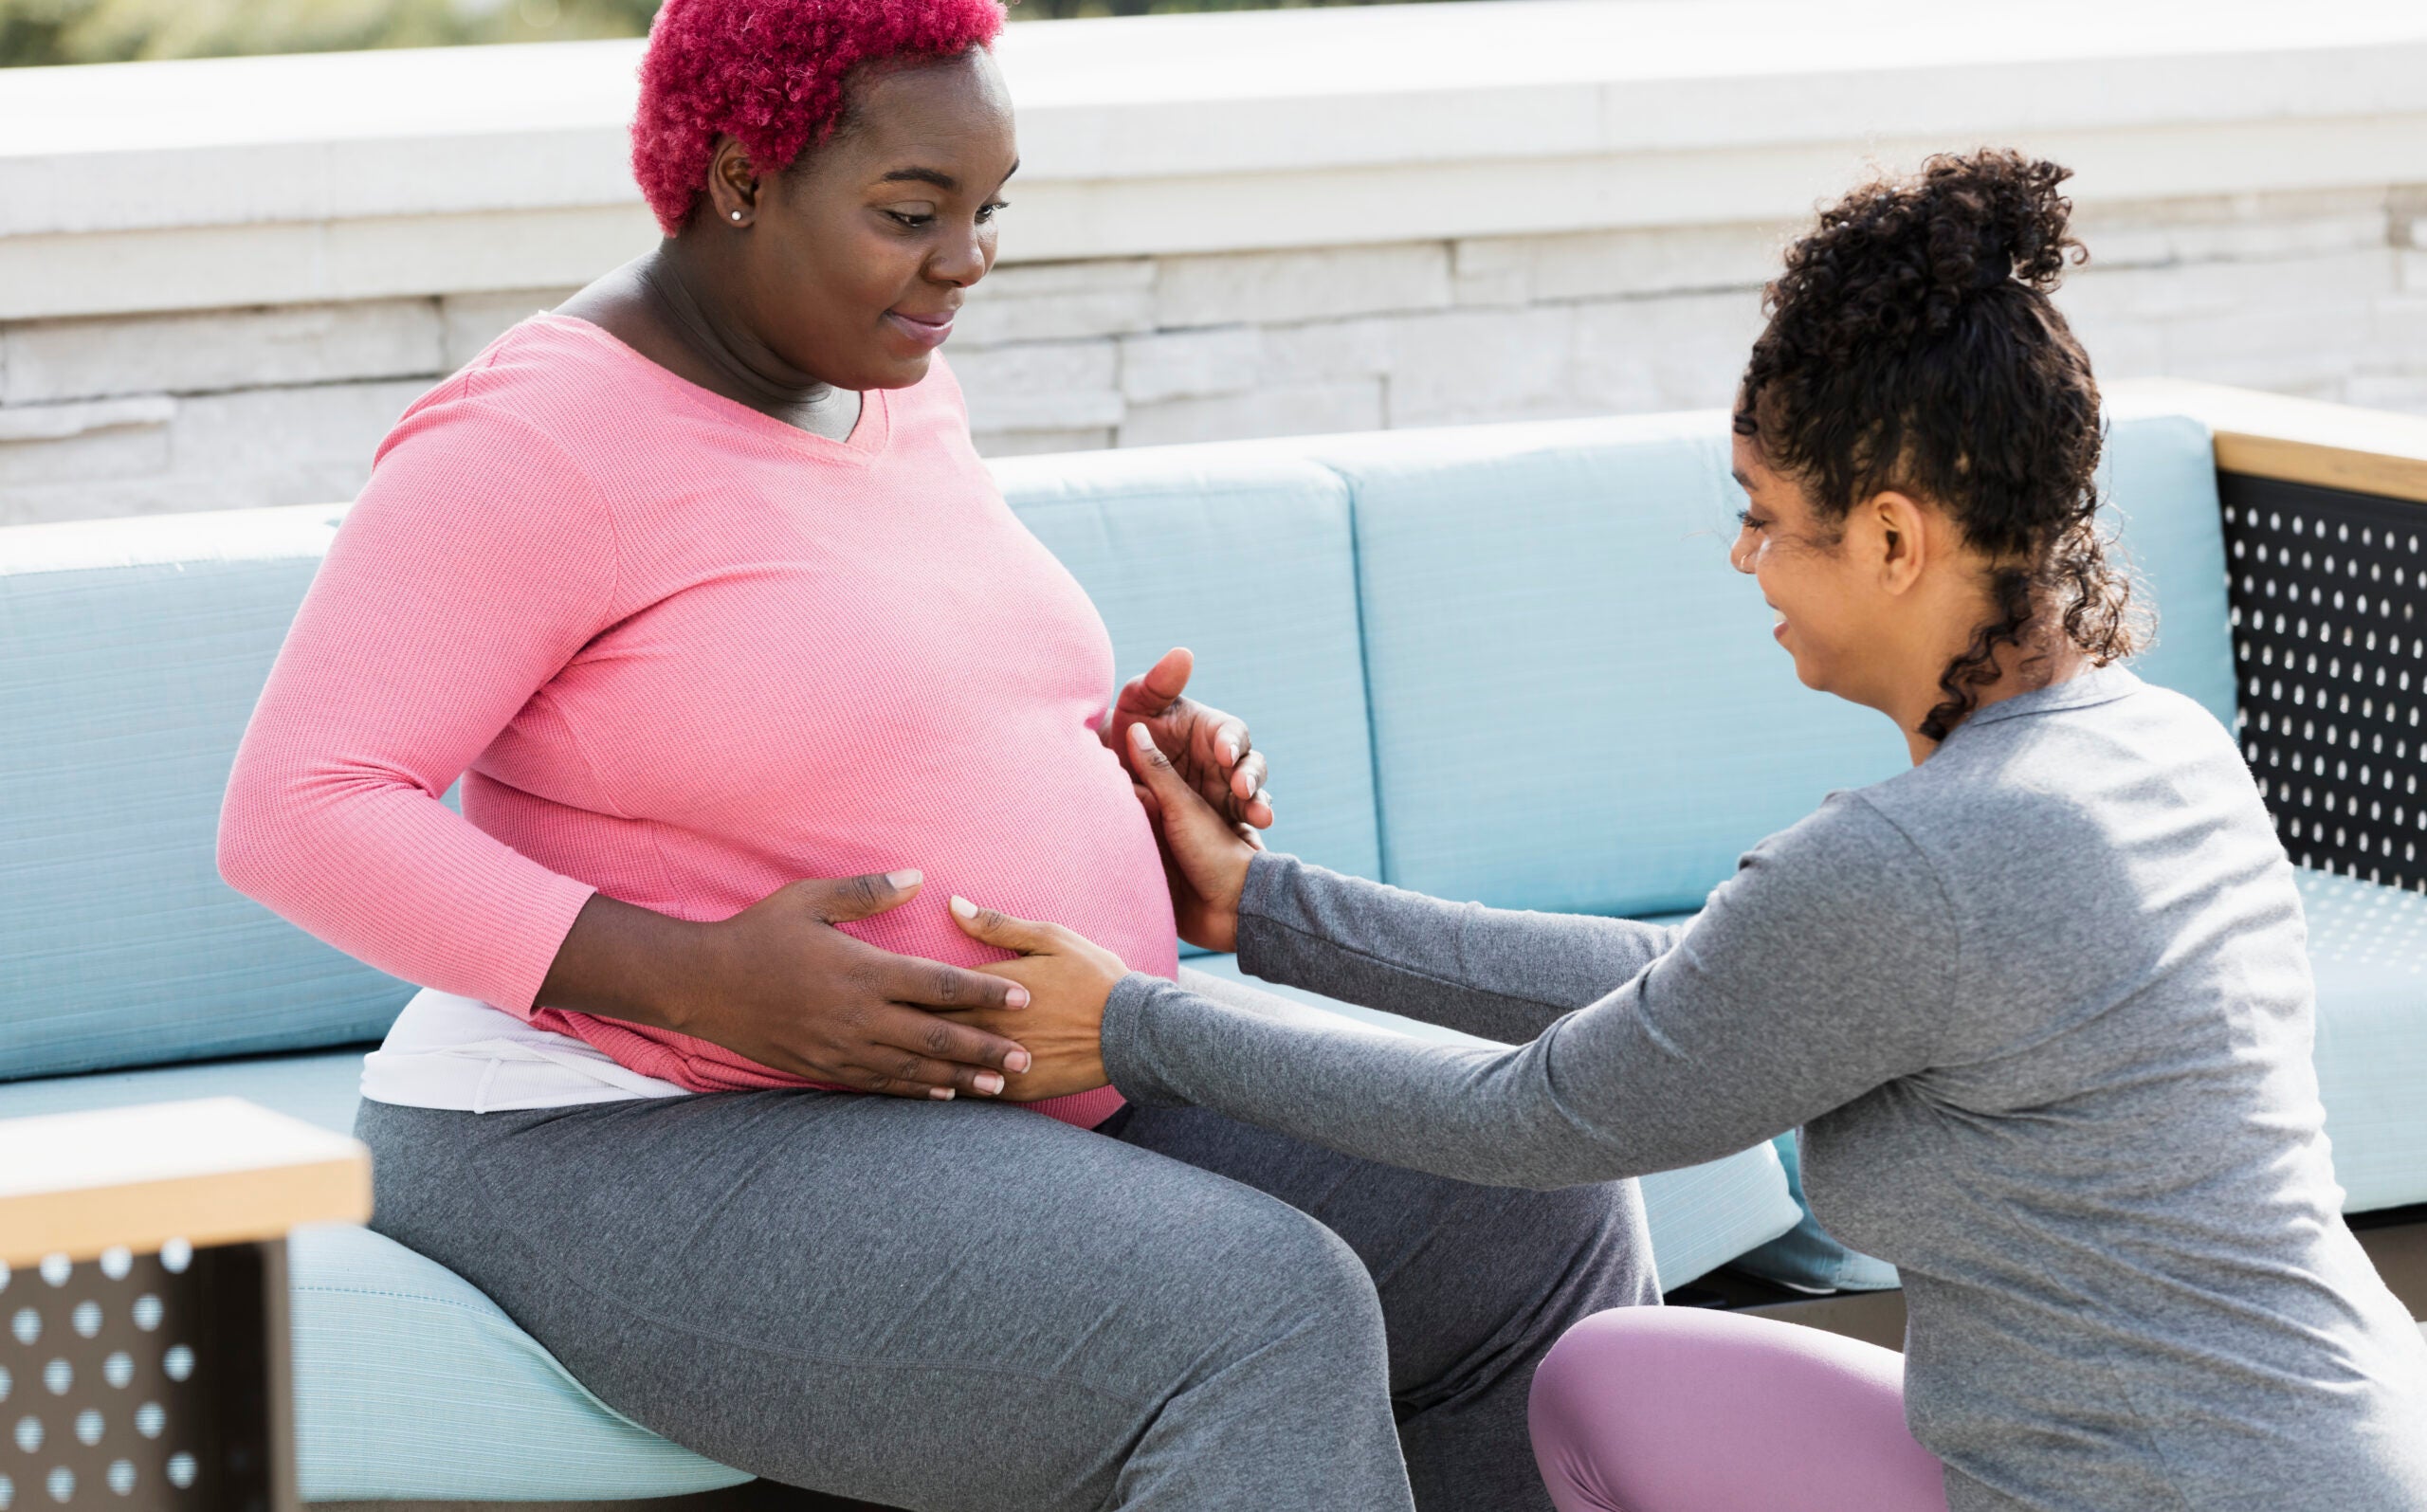 Pregnant woman with short, bright red dyed hair wearing a long-sleeved pink shirt and grey yoga pants sits on a sky blue couch as a doula touches her stomach.